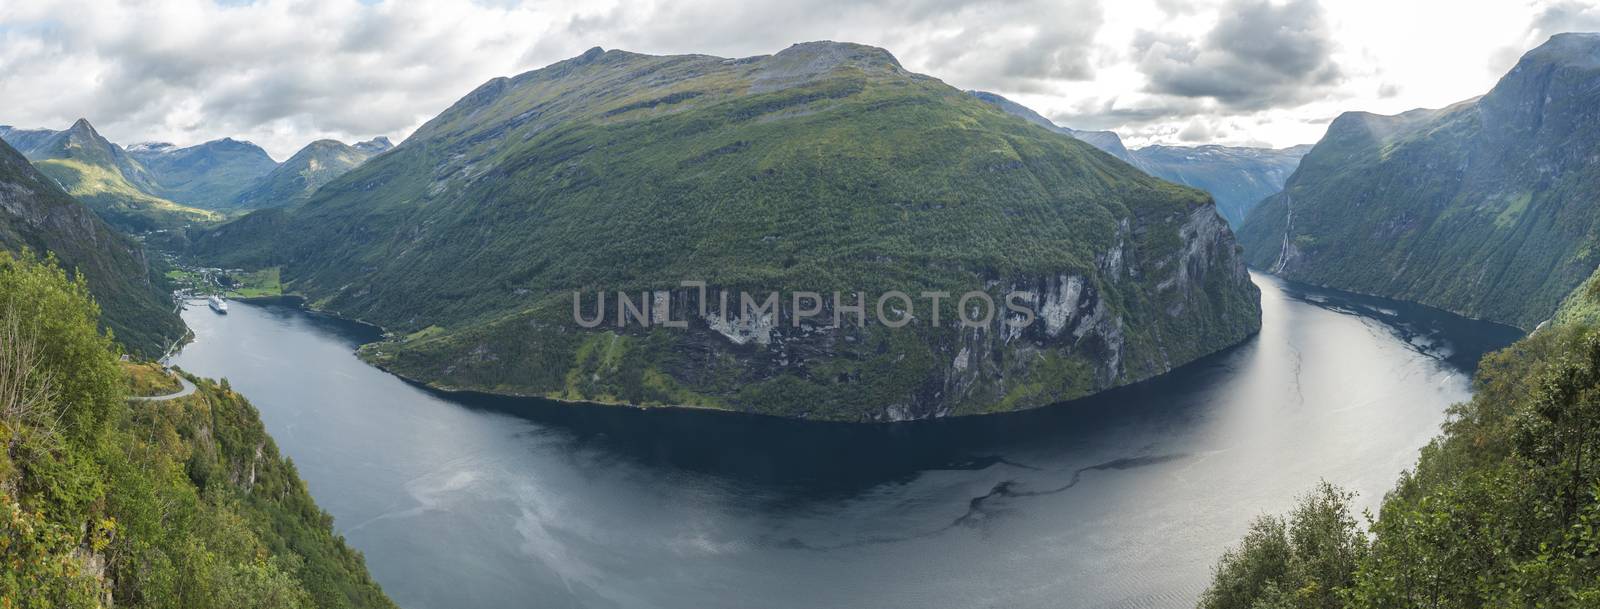 Panorama of Geirangerfjord in Sunnmore region, Norway, one of the most beautiful fjords in the world, included on the UNESCO World Heritage. View from Ornesvingen eagle road viewpoint, early autumn, cloudy day